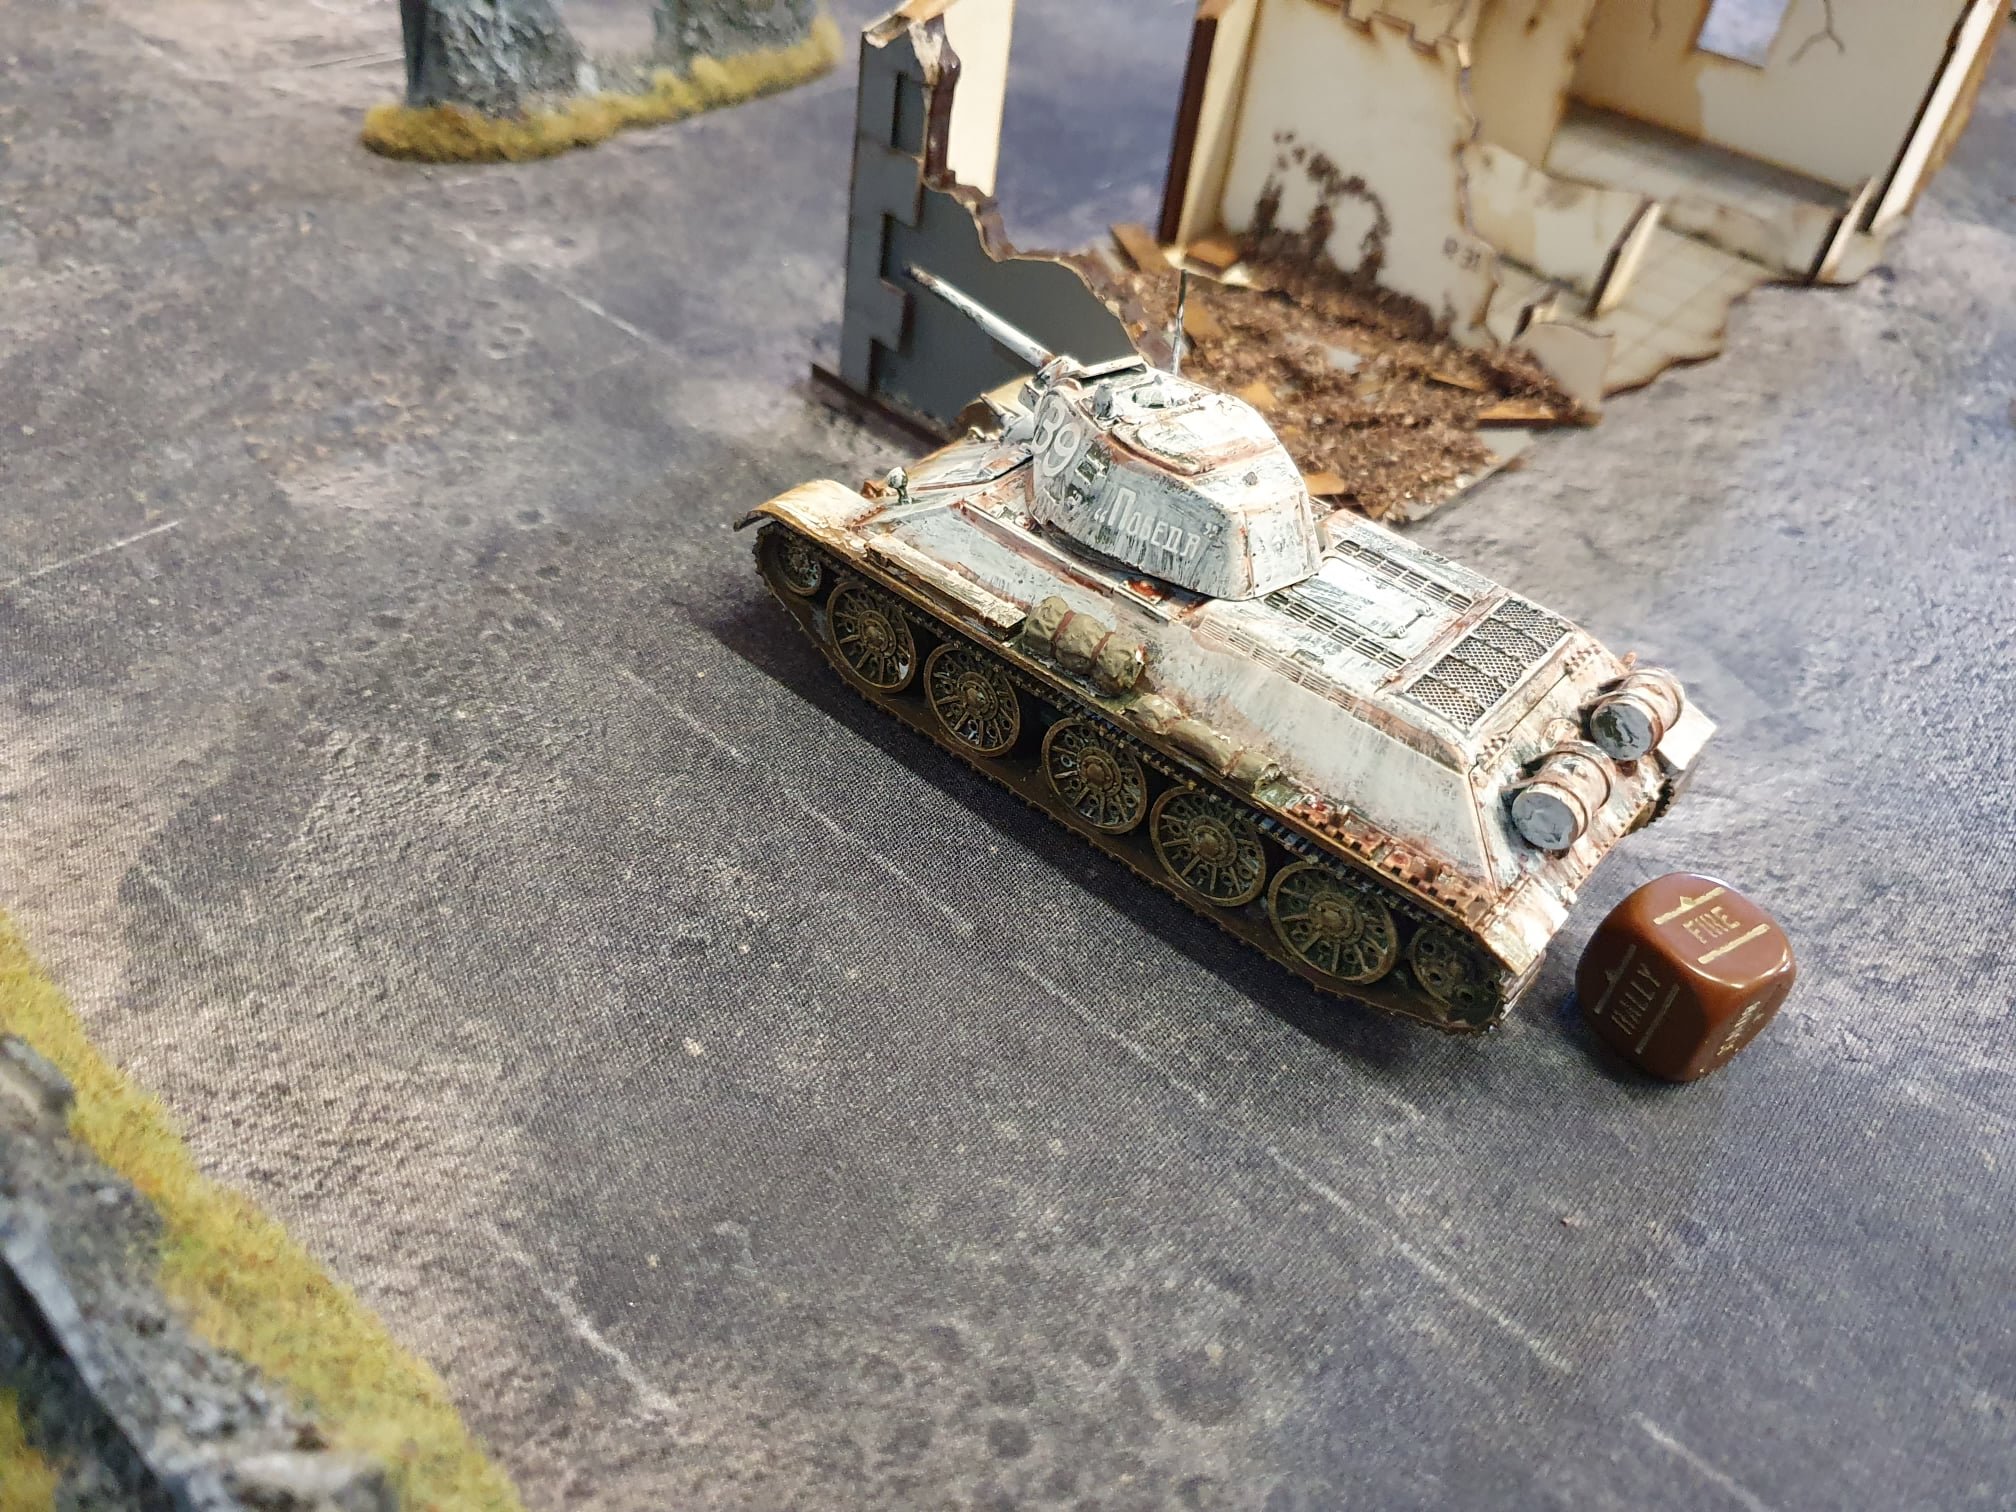  Bolt Action is also played at Warlords from time to time 